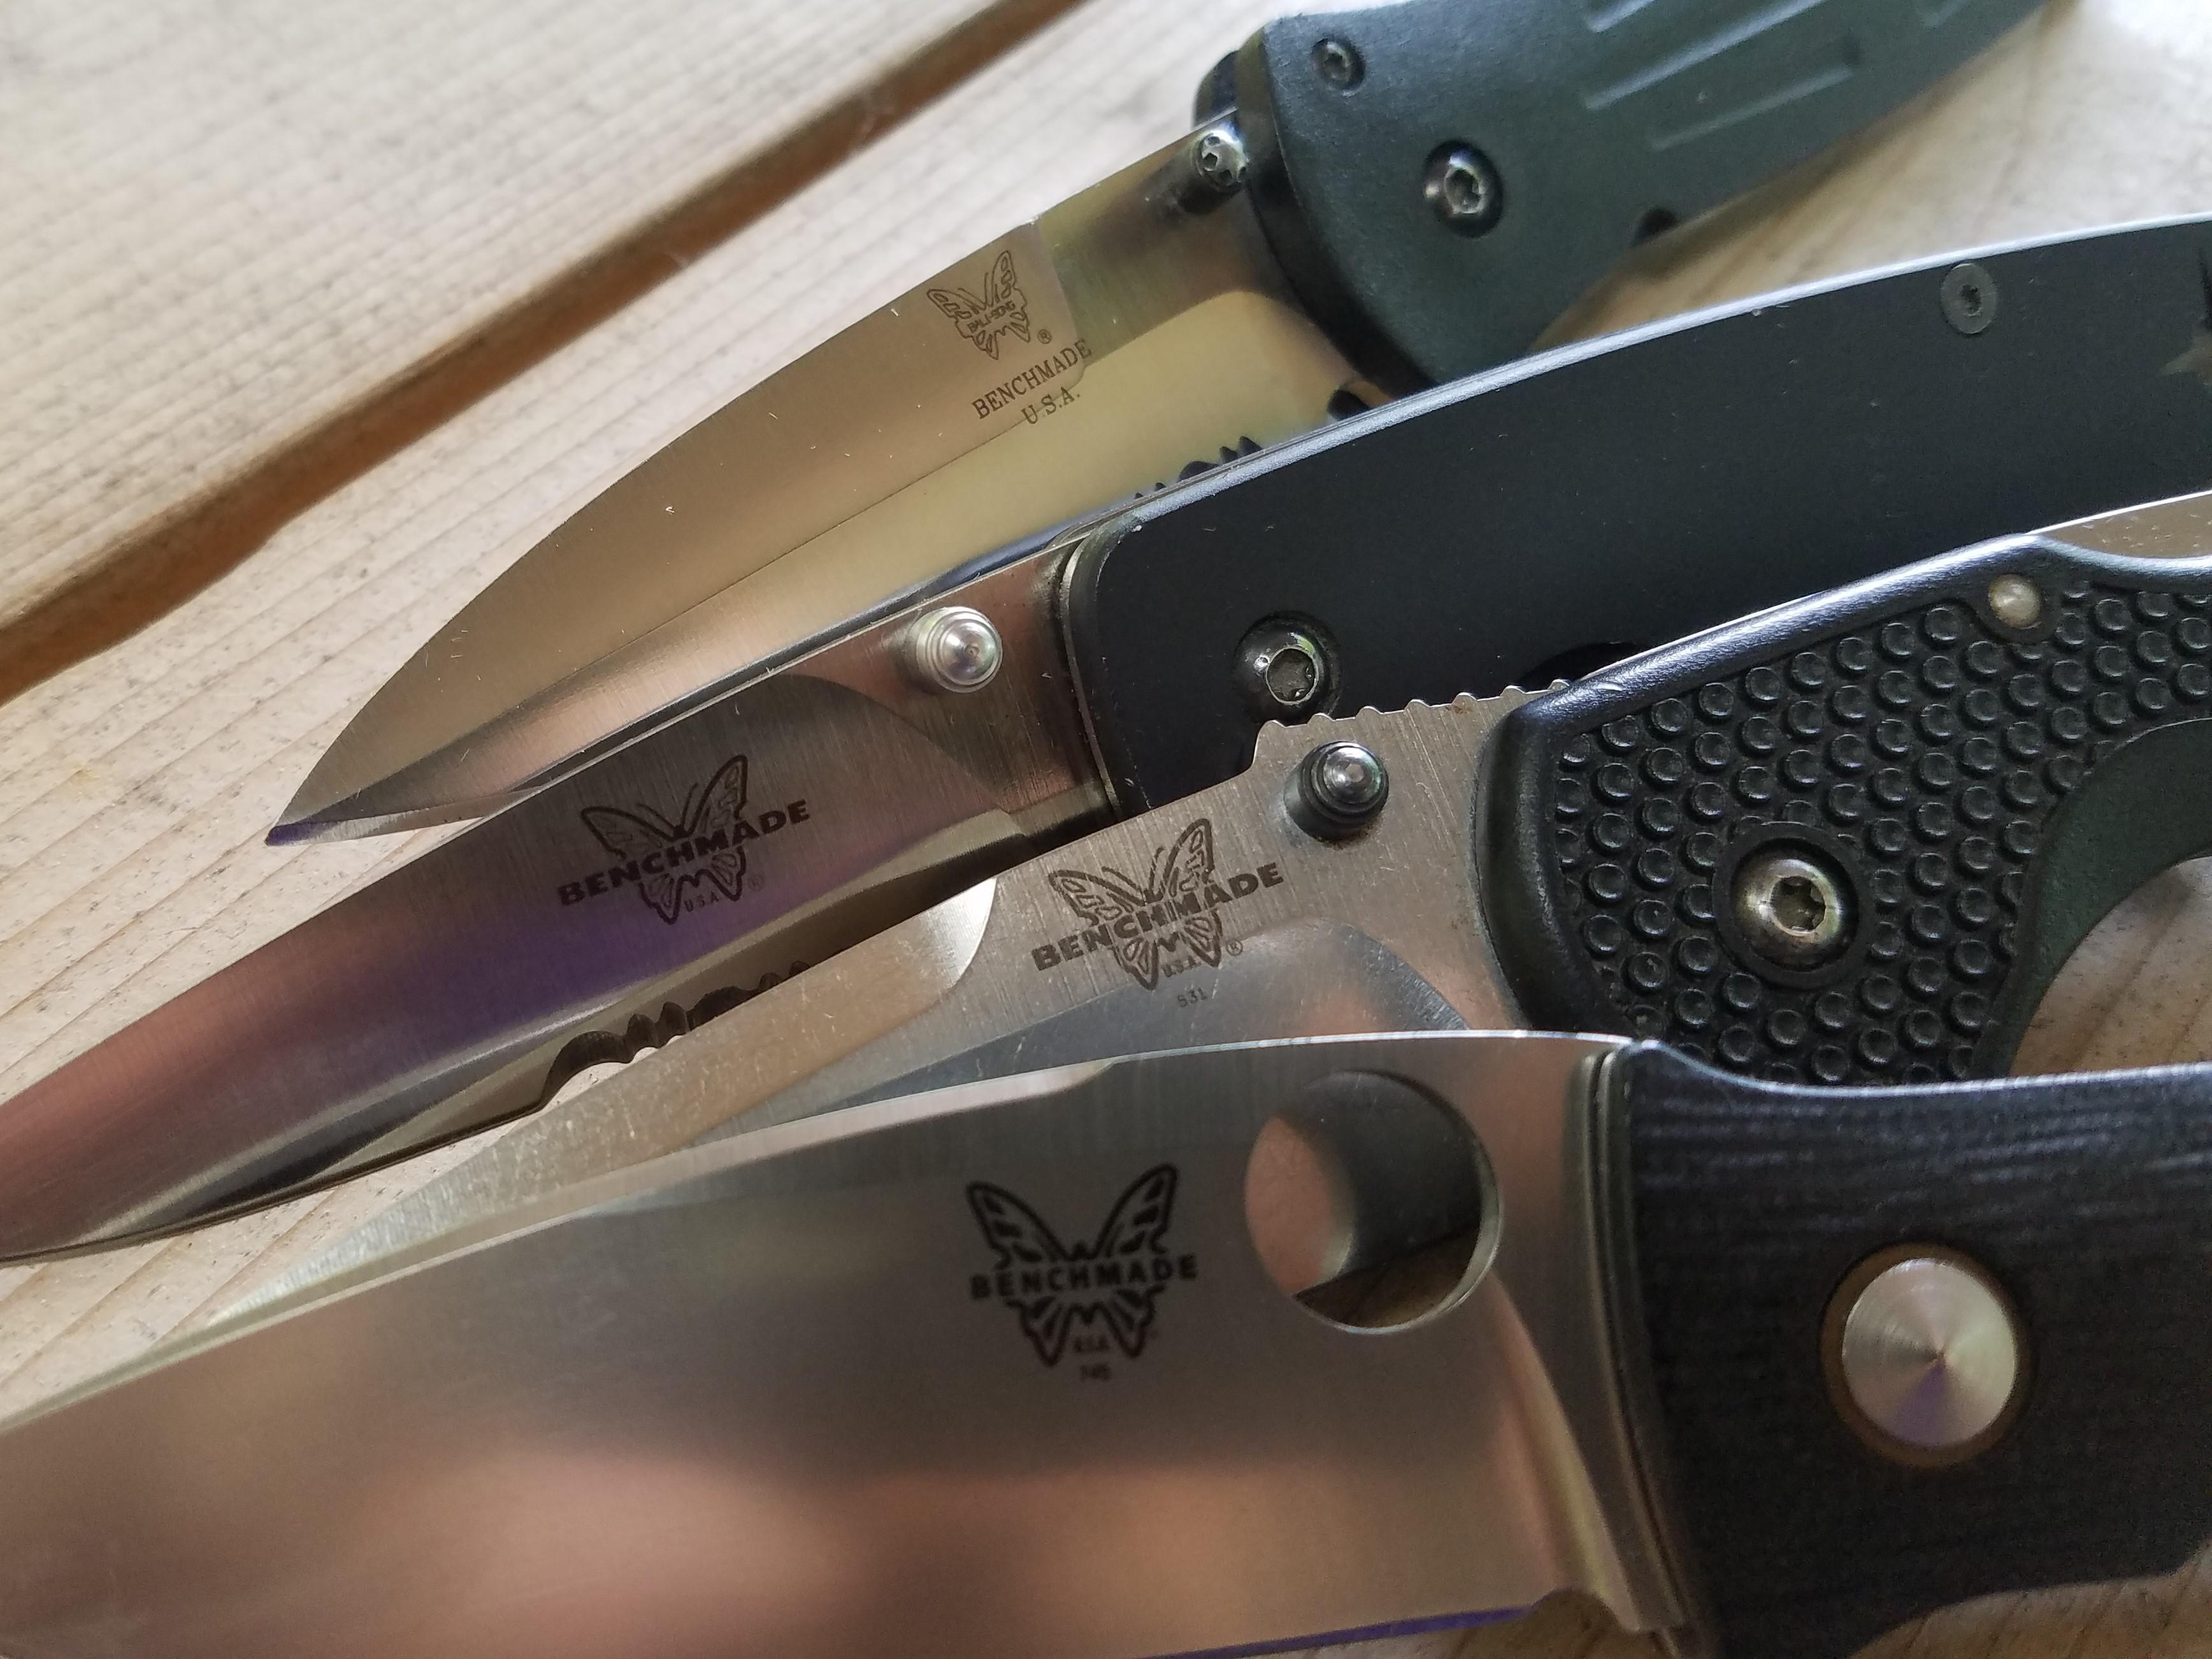 Benchmade Logo - Benchmade logo changes over time : knives